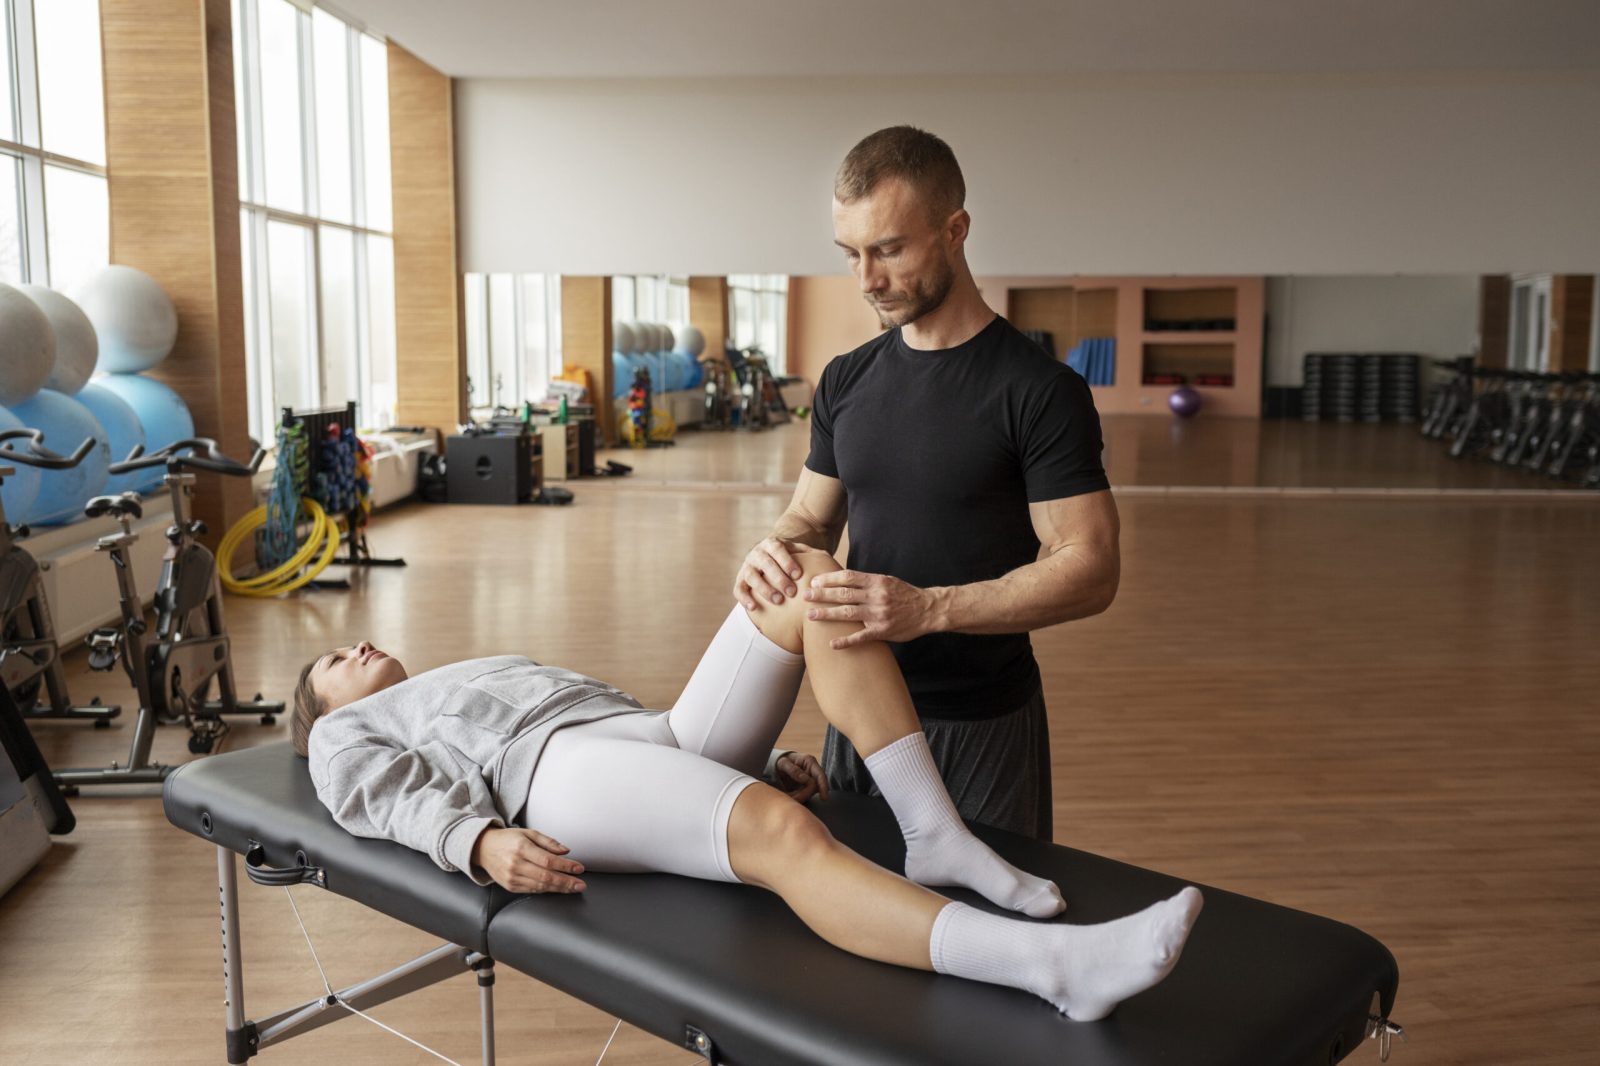 patient-doing-physical-rehabilitation-helped-by-therapists (1)